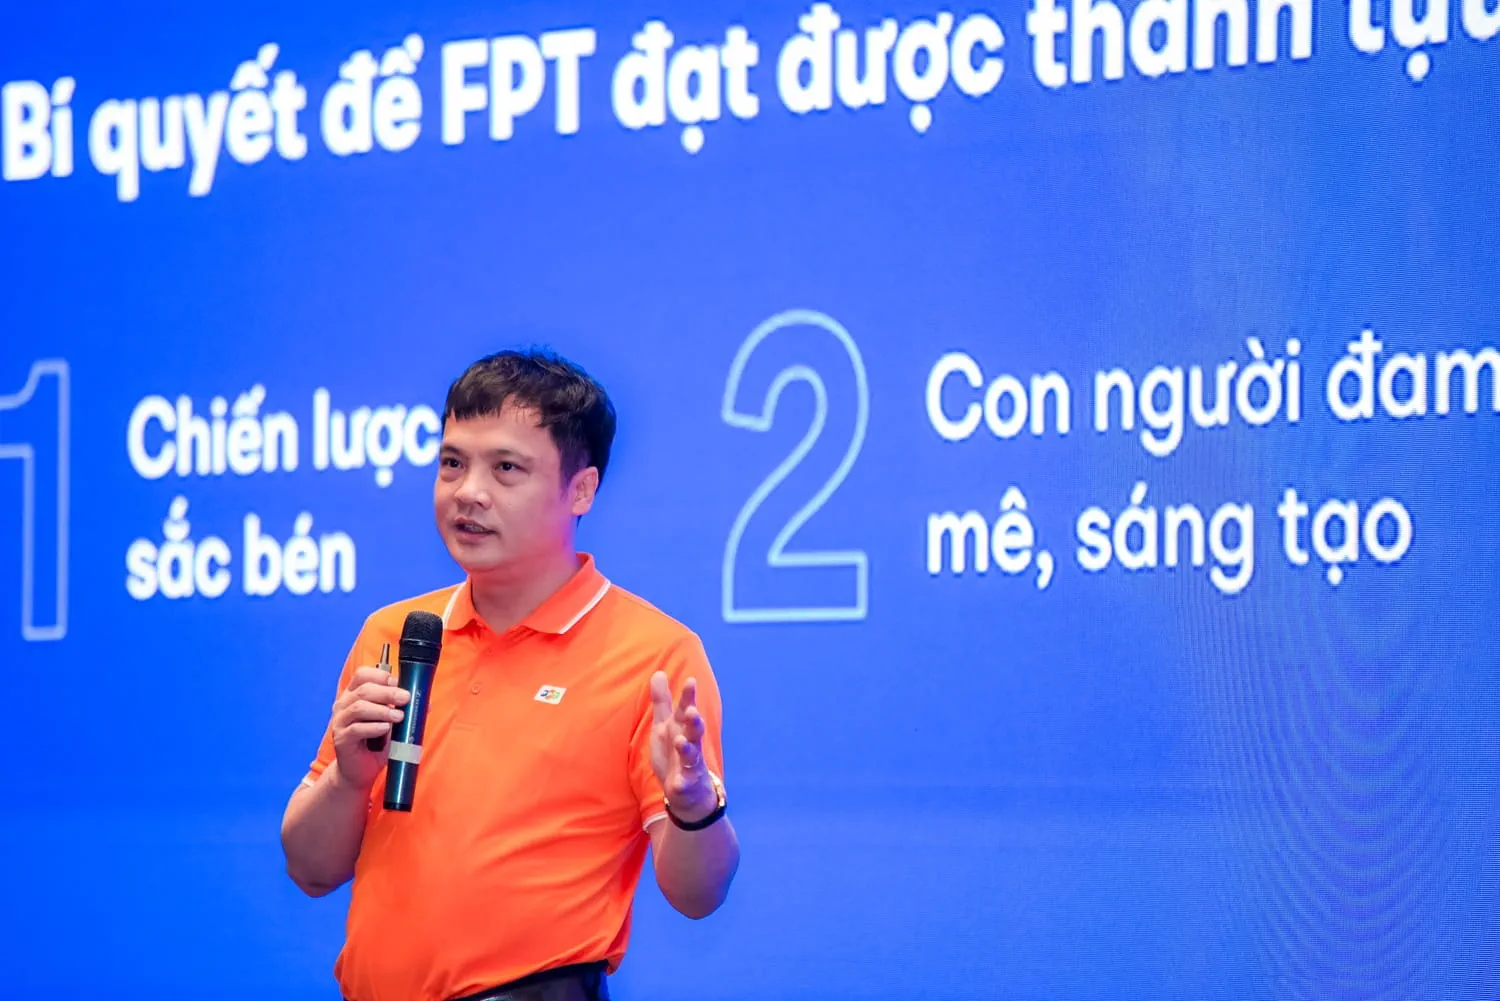 Mr. Nguyen Van Khoa, CEO of FPT, stated, "FPT has ambitious goals and dreams. People may not believe it, but we are determined to conquer them all."